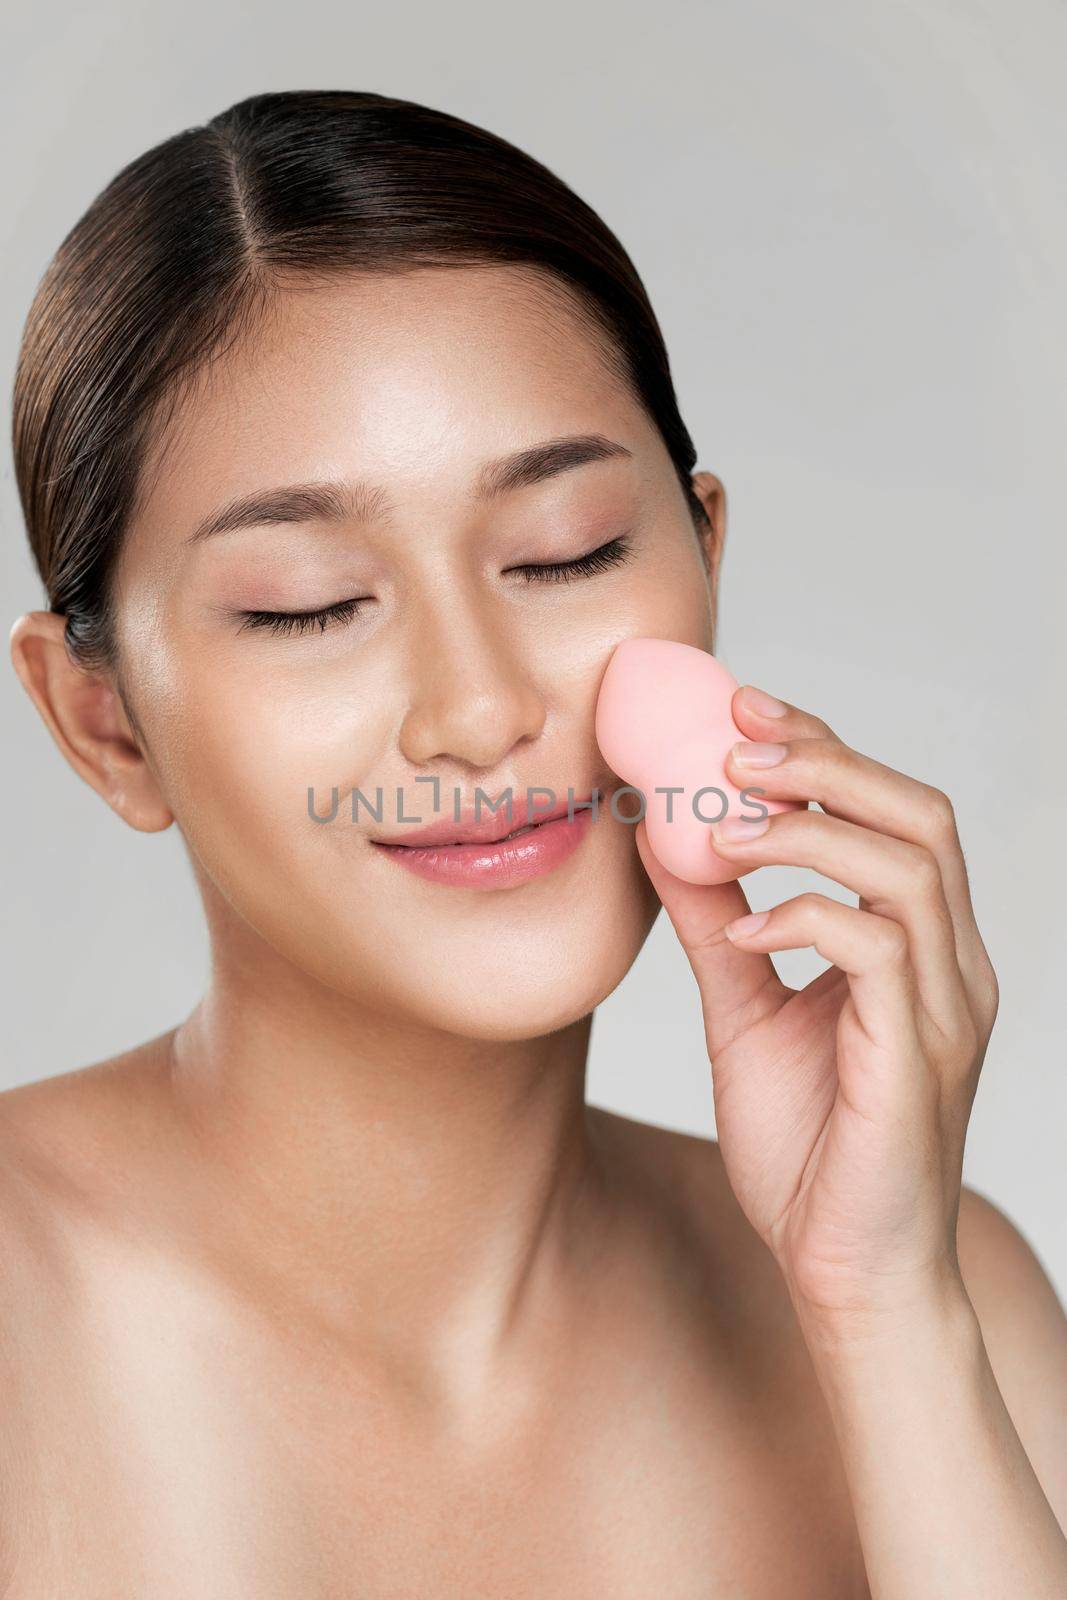 Closeup ardent woman applying her cheek with dry powder while looking at camera. by biancoblue